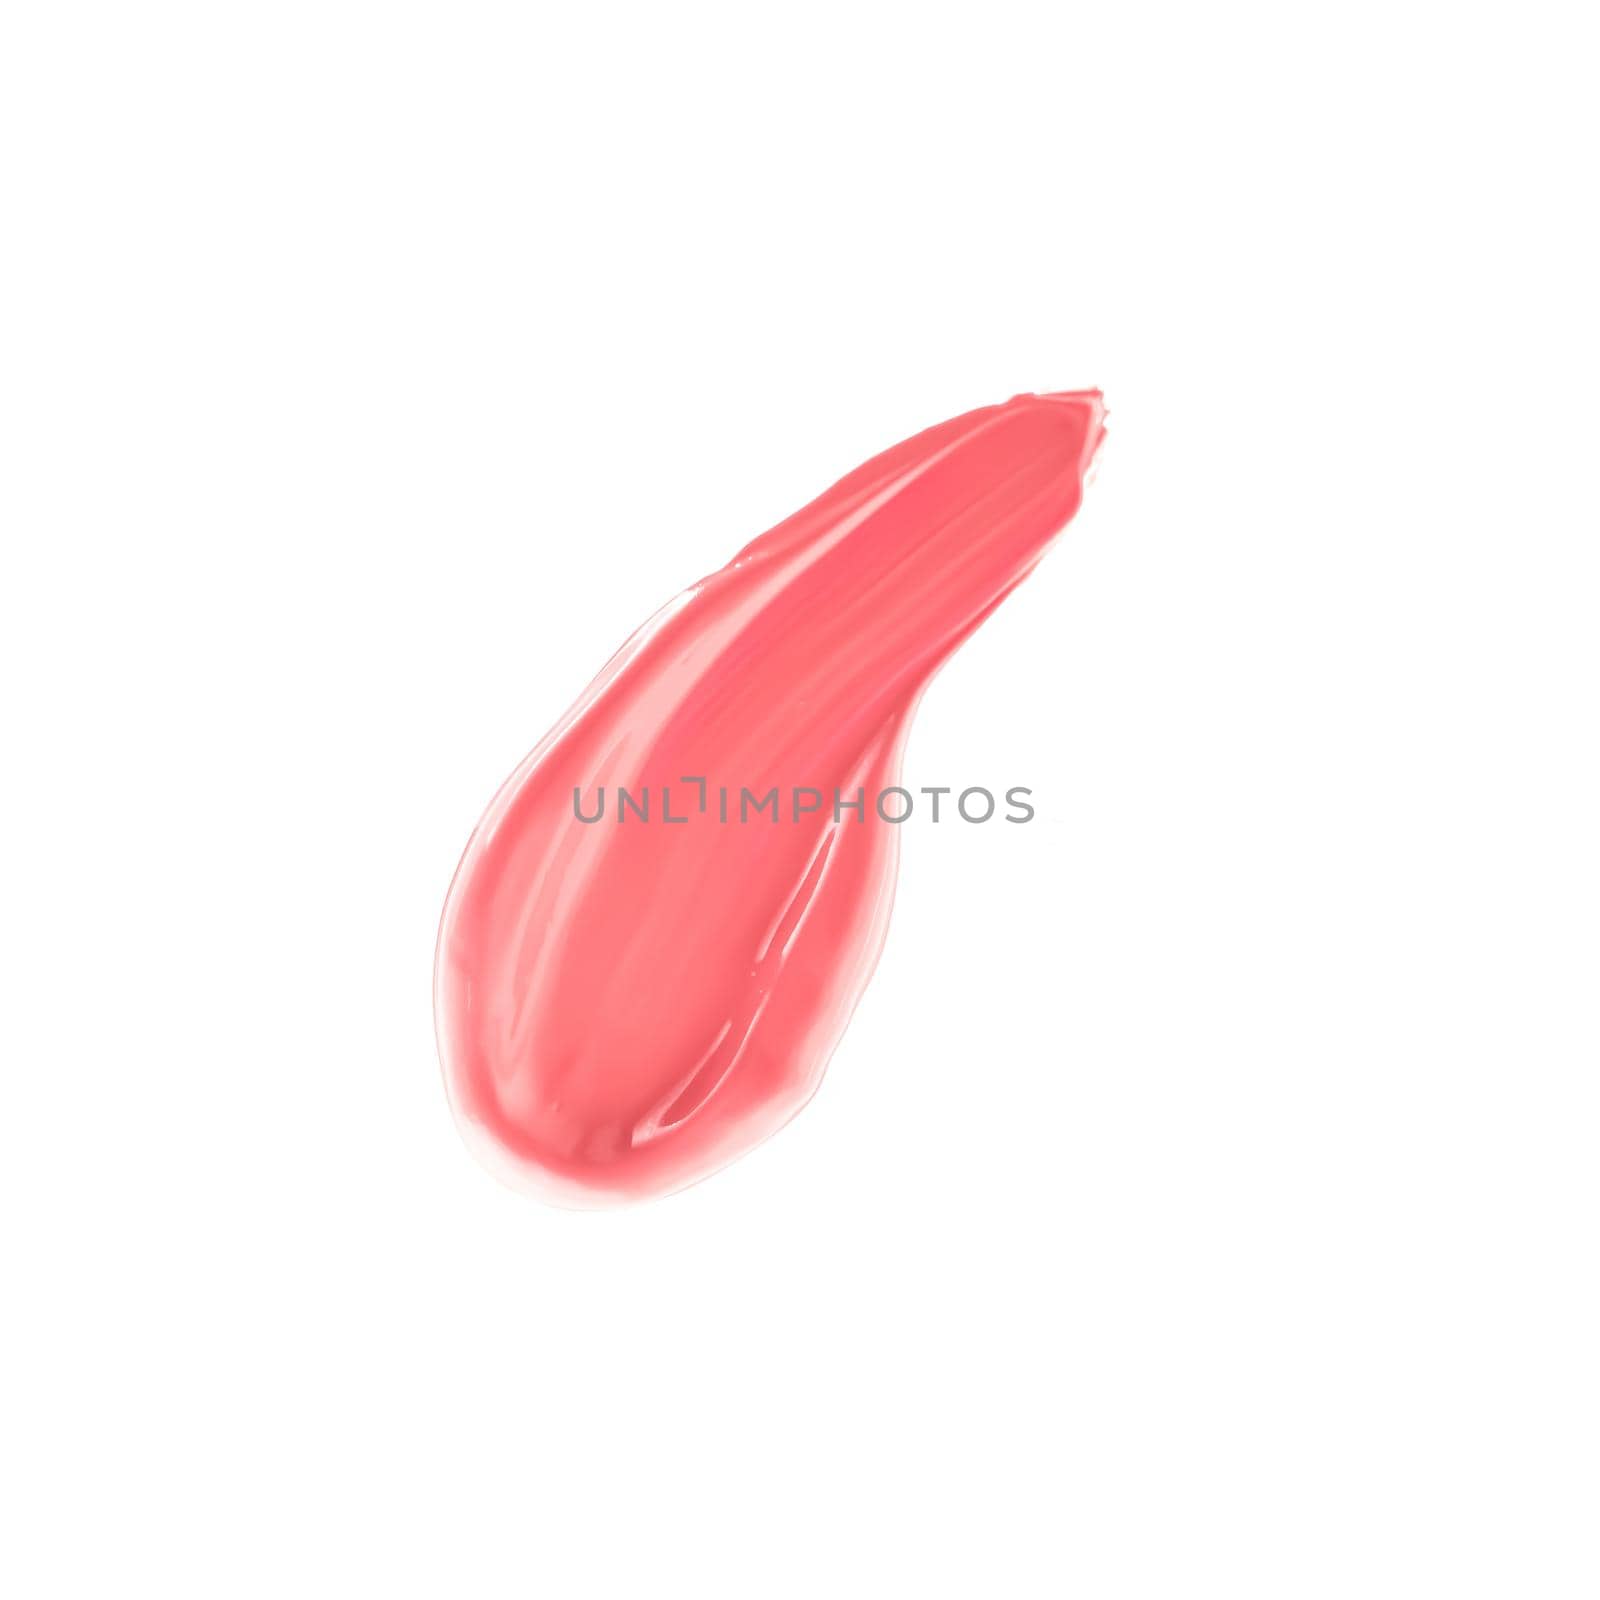 Pastel coral beauty swatch, skincare and makeup cosmetic product sample texture isolated on white background, make-up smudge, cream cosmetics smear or paint brush stroke closeup